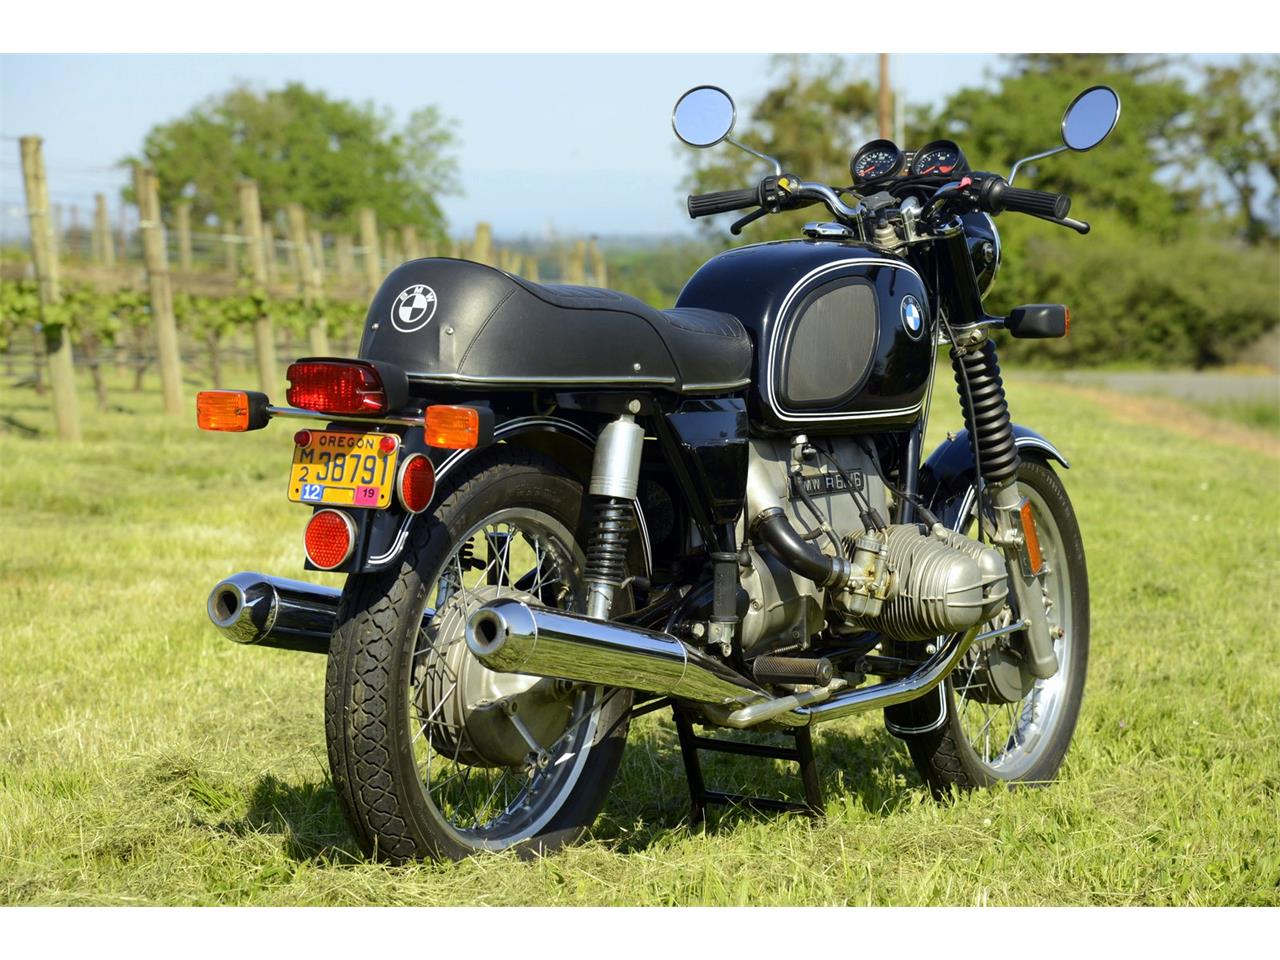 Classic Vintage Bmw Motorcycles For Sale / 1973 Bmw R60/5 Classic BMW